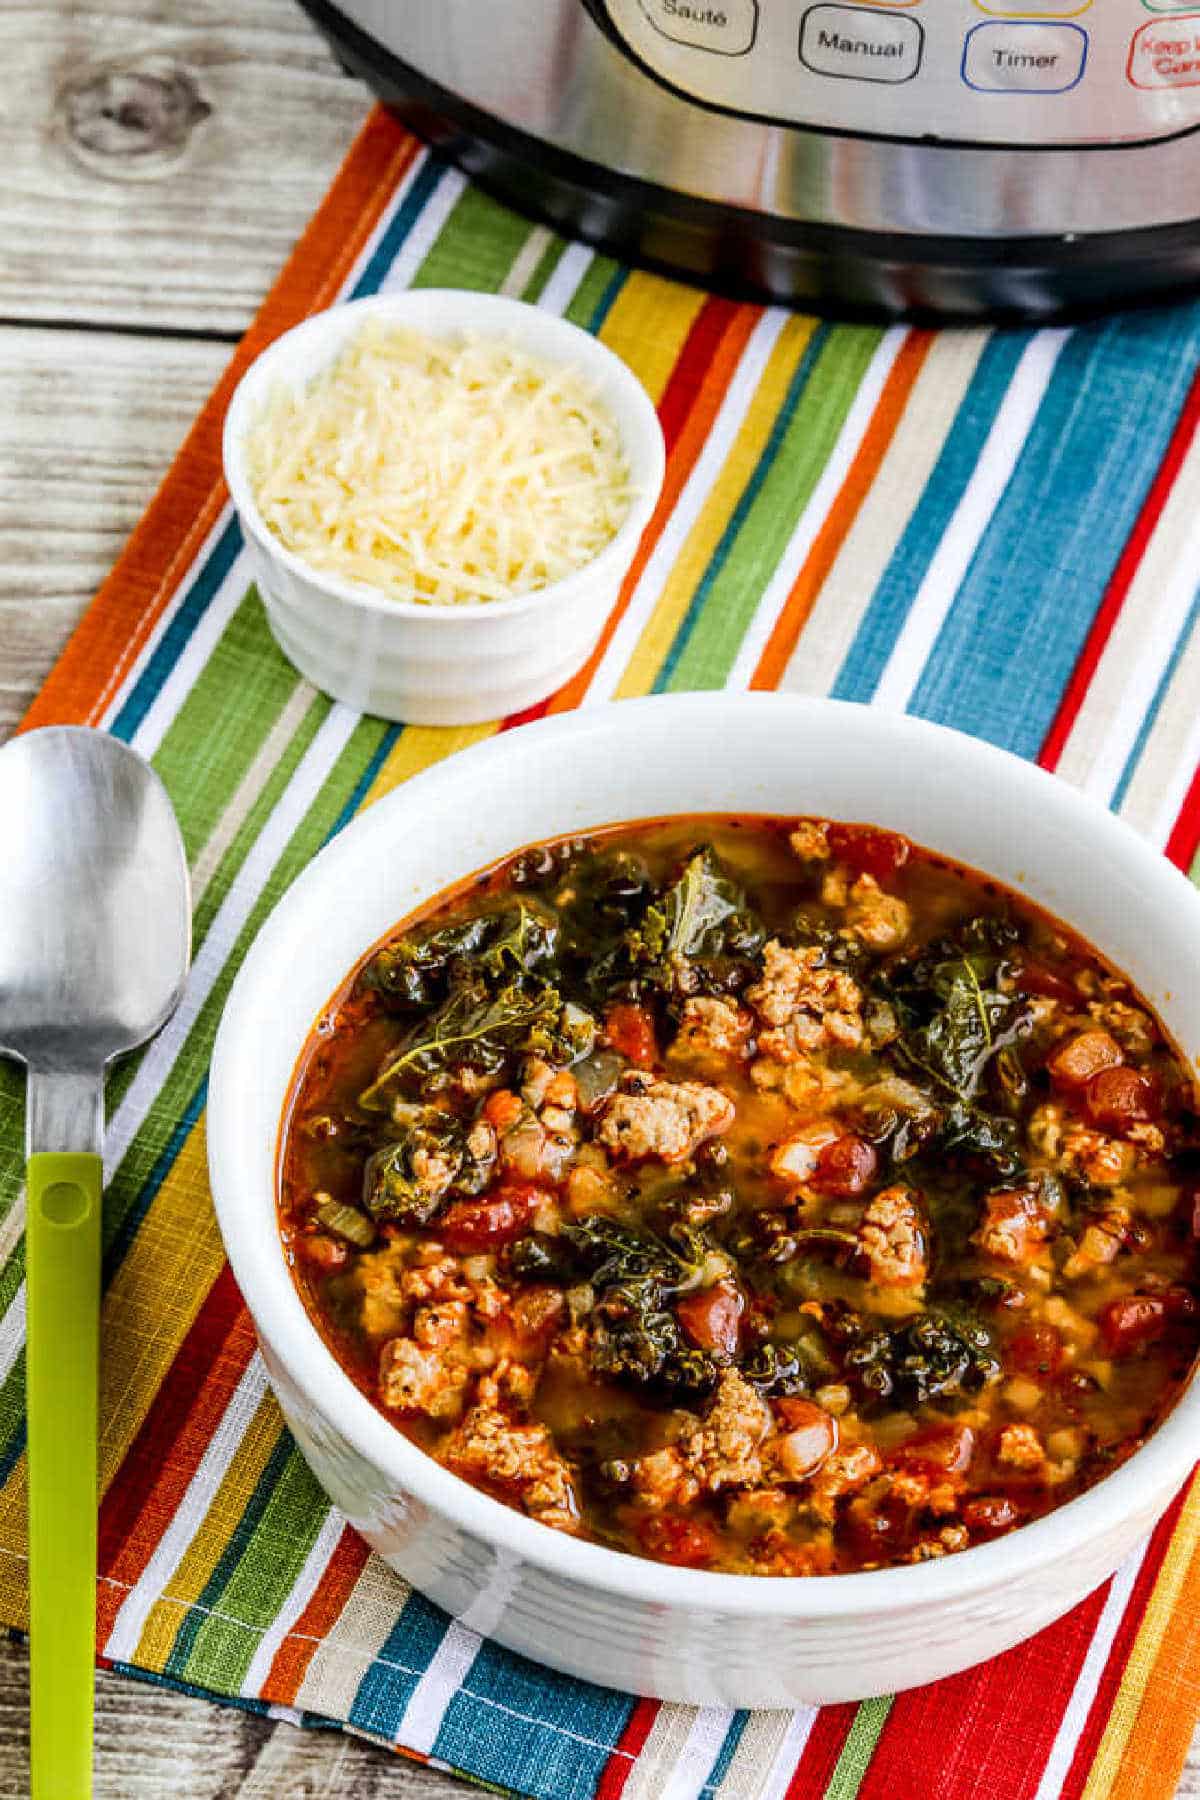 Instant Pot Sausage and Kale Soup shown in serving bowl with Parmesan and Instant Pot in background